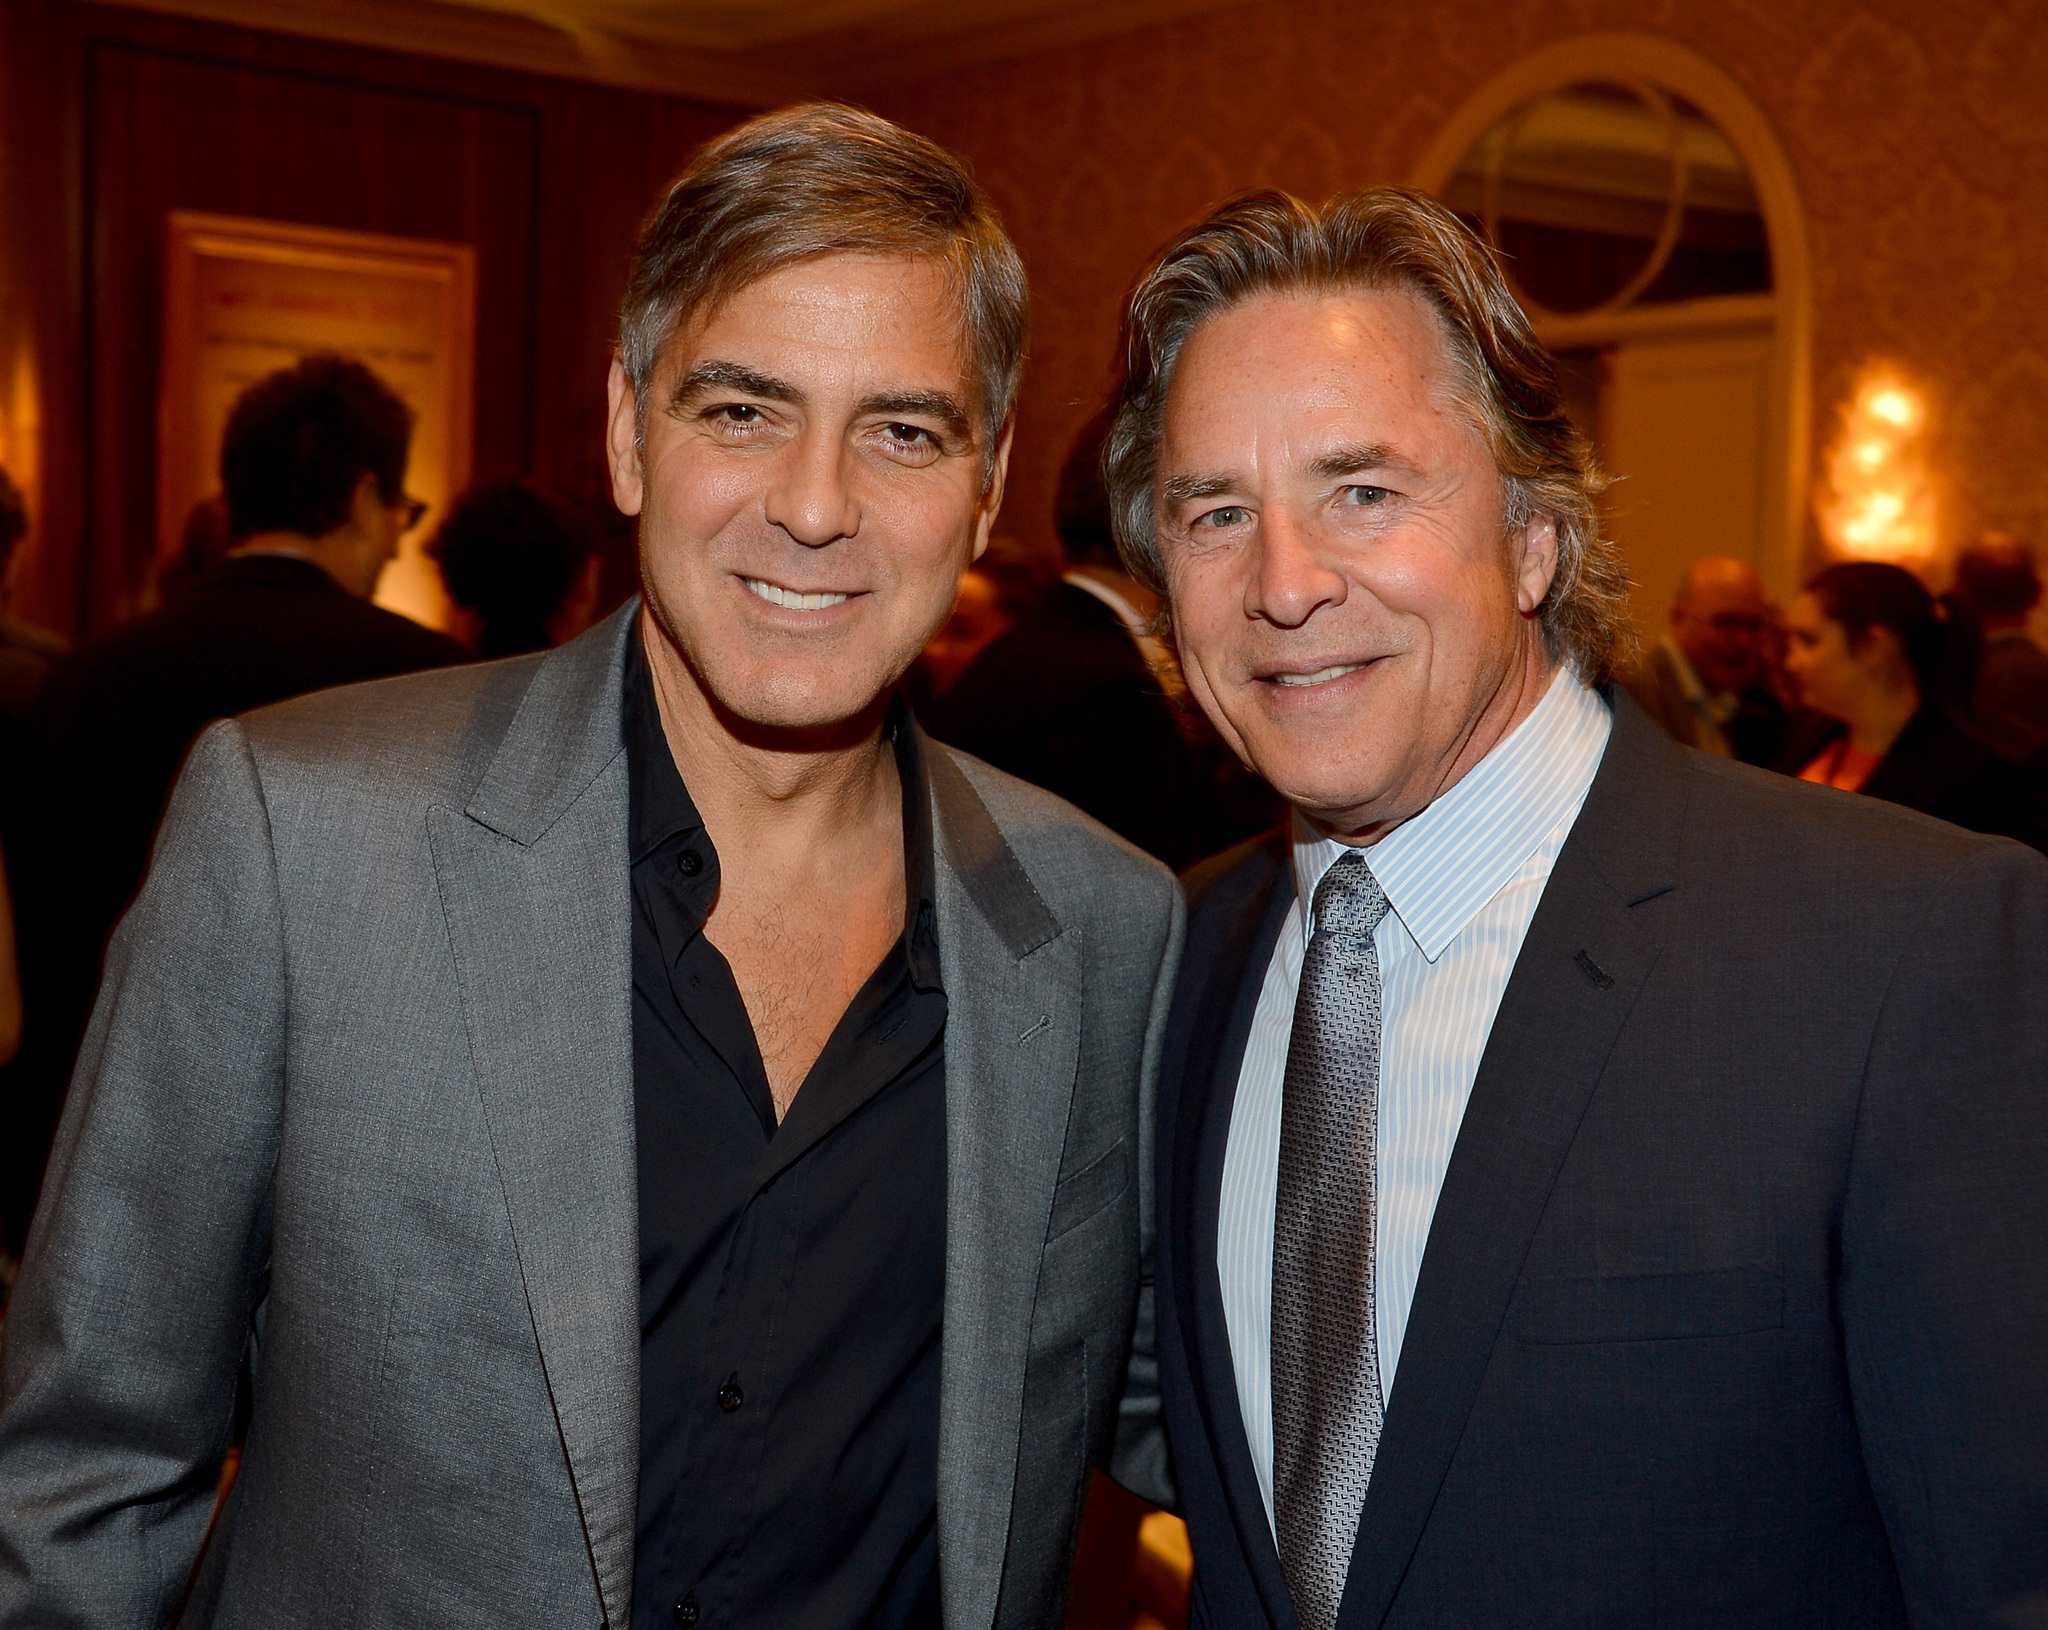 George Clooney and Don Johnson